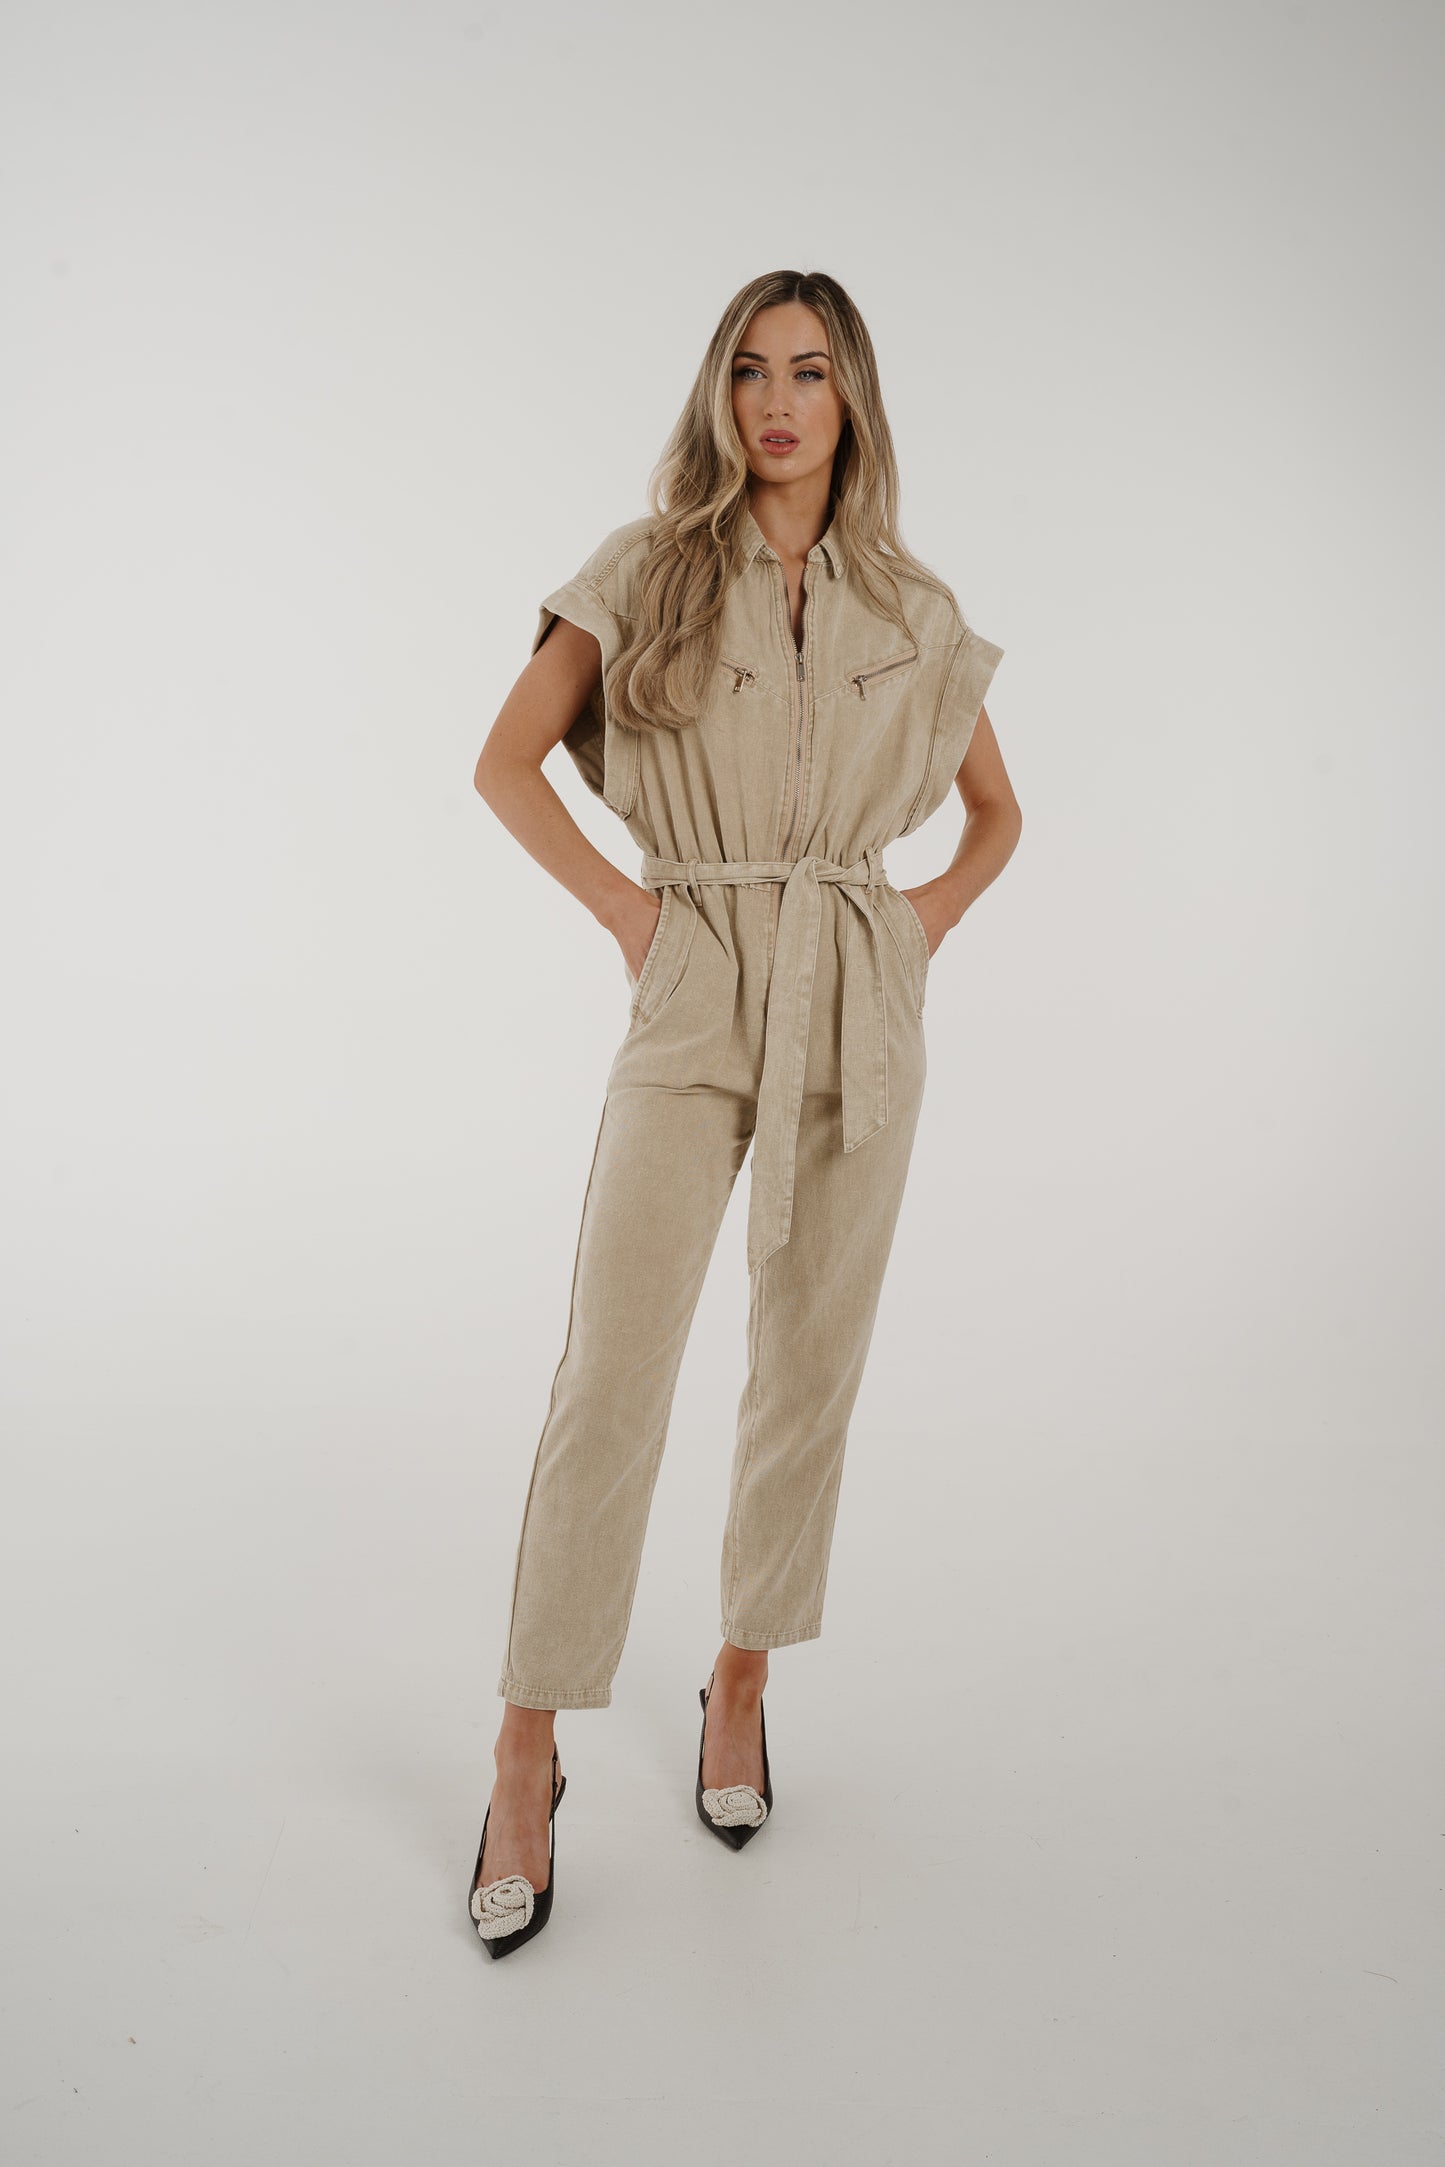 Cora Short Sleeve Jumpsuit In Neutral